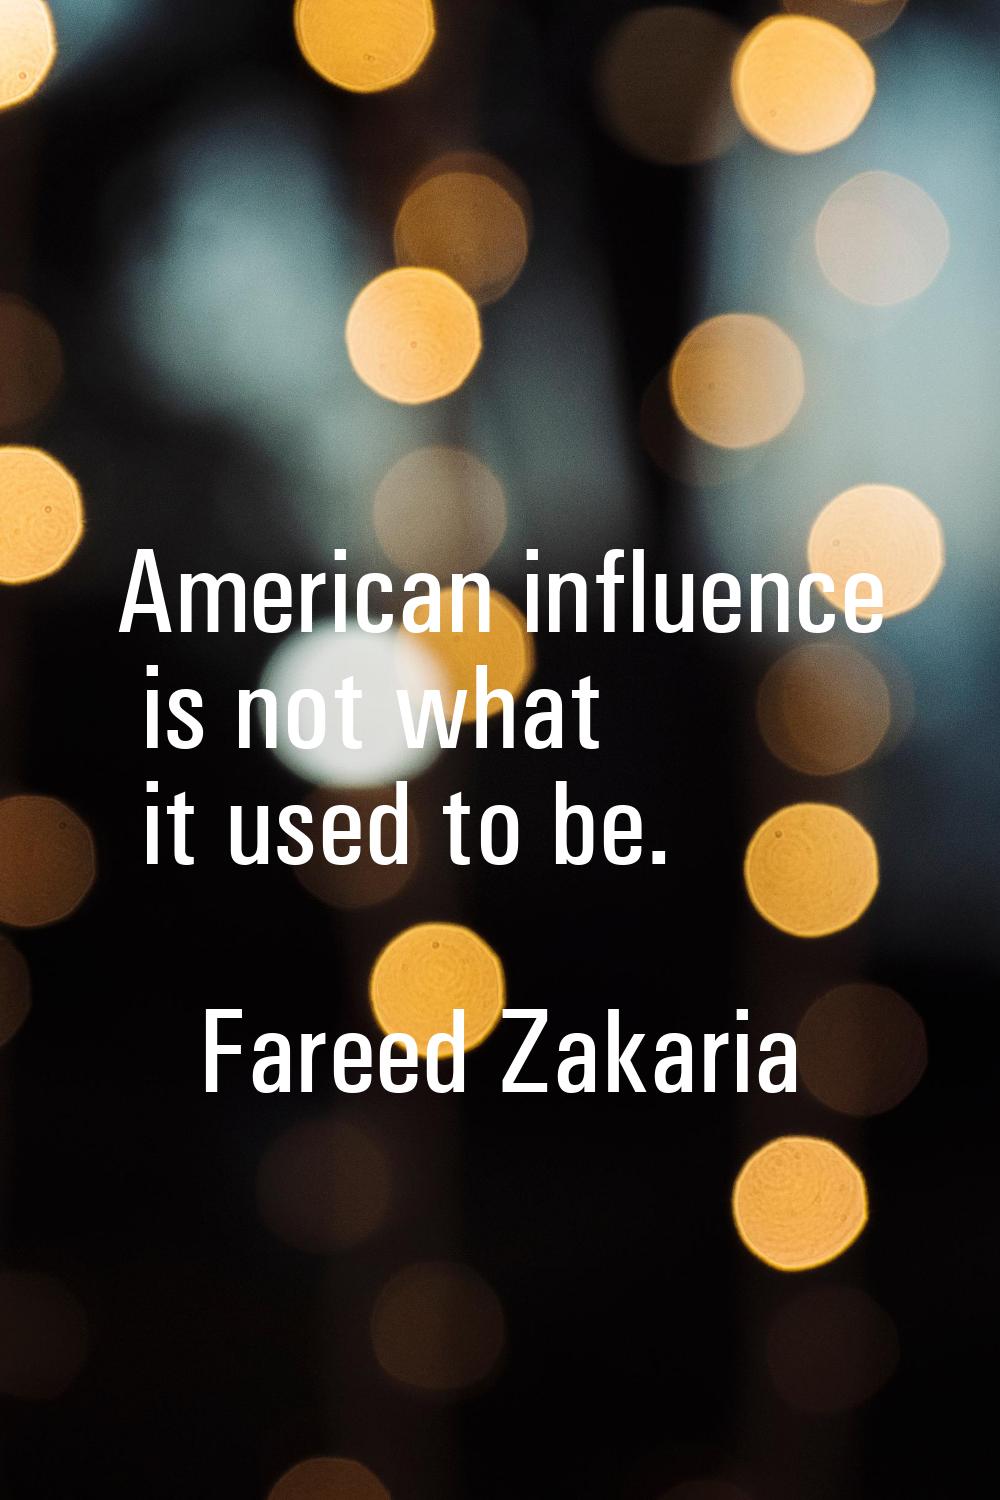 American influence is not what it used to be.